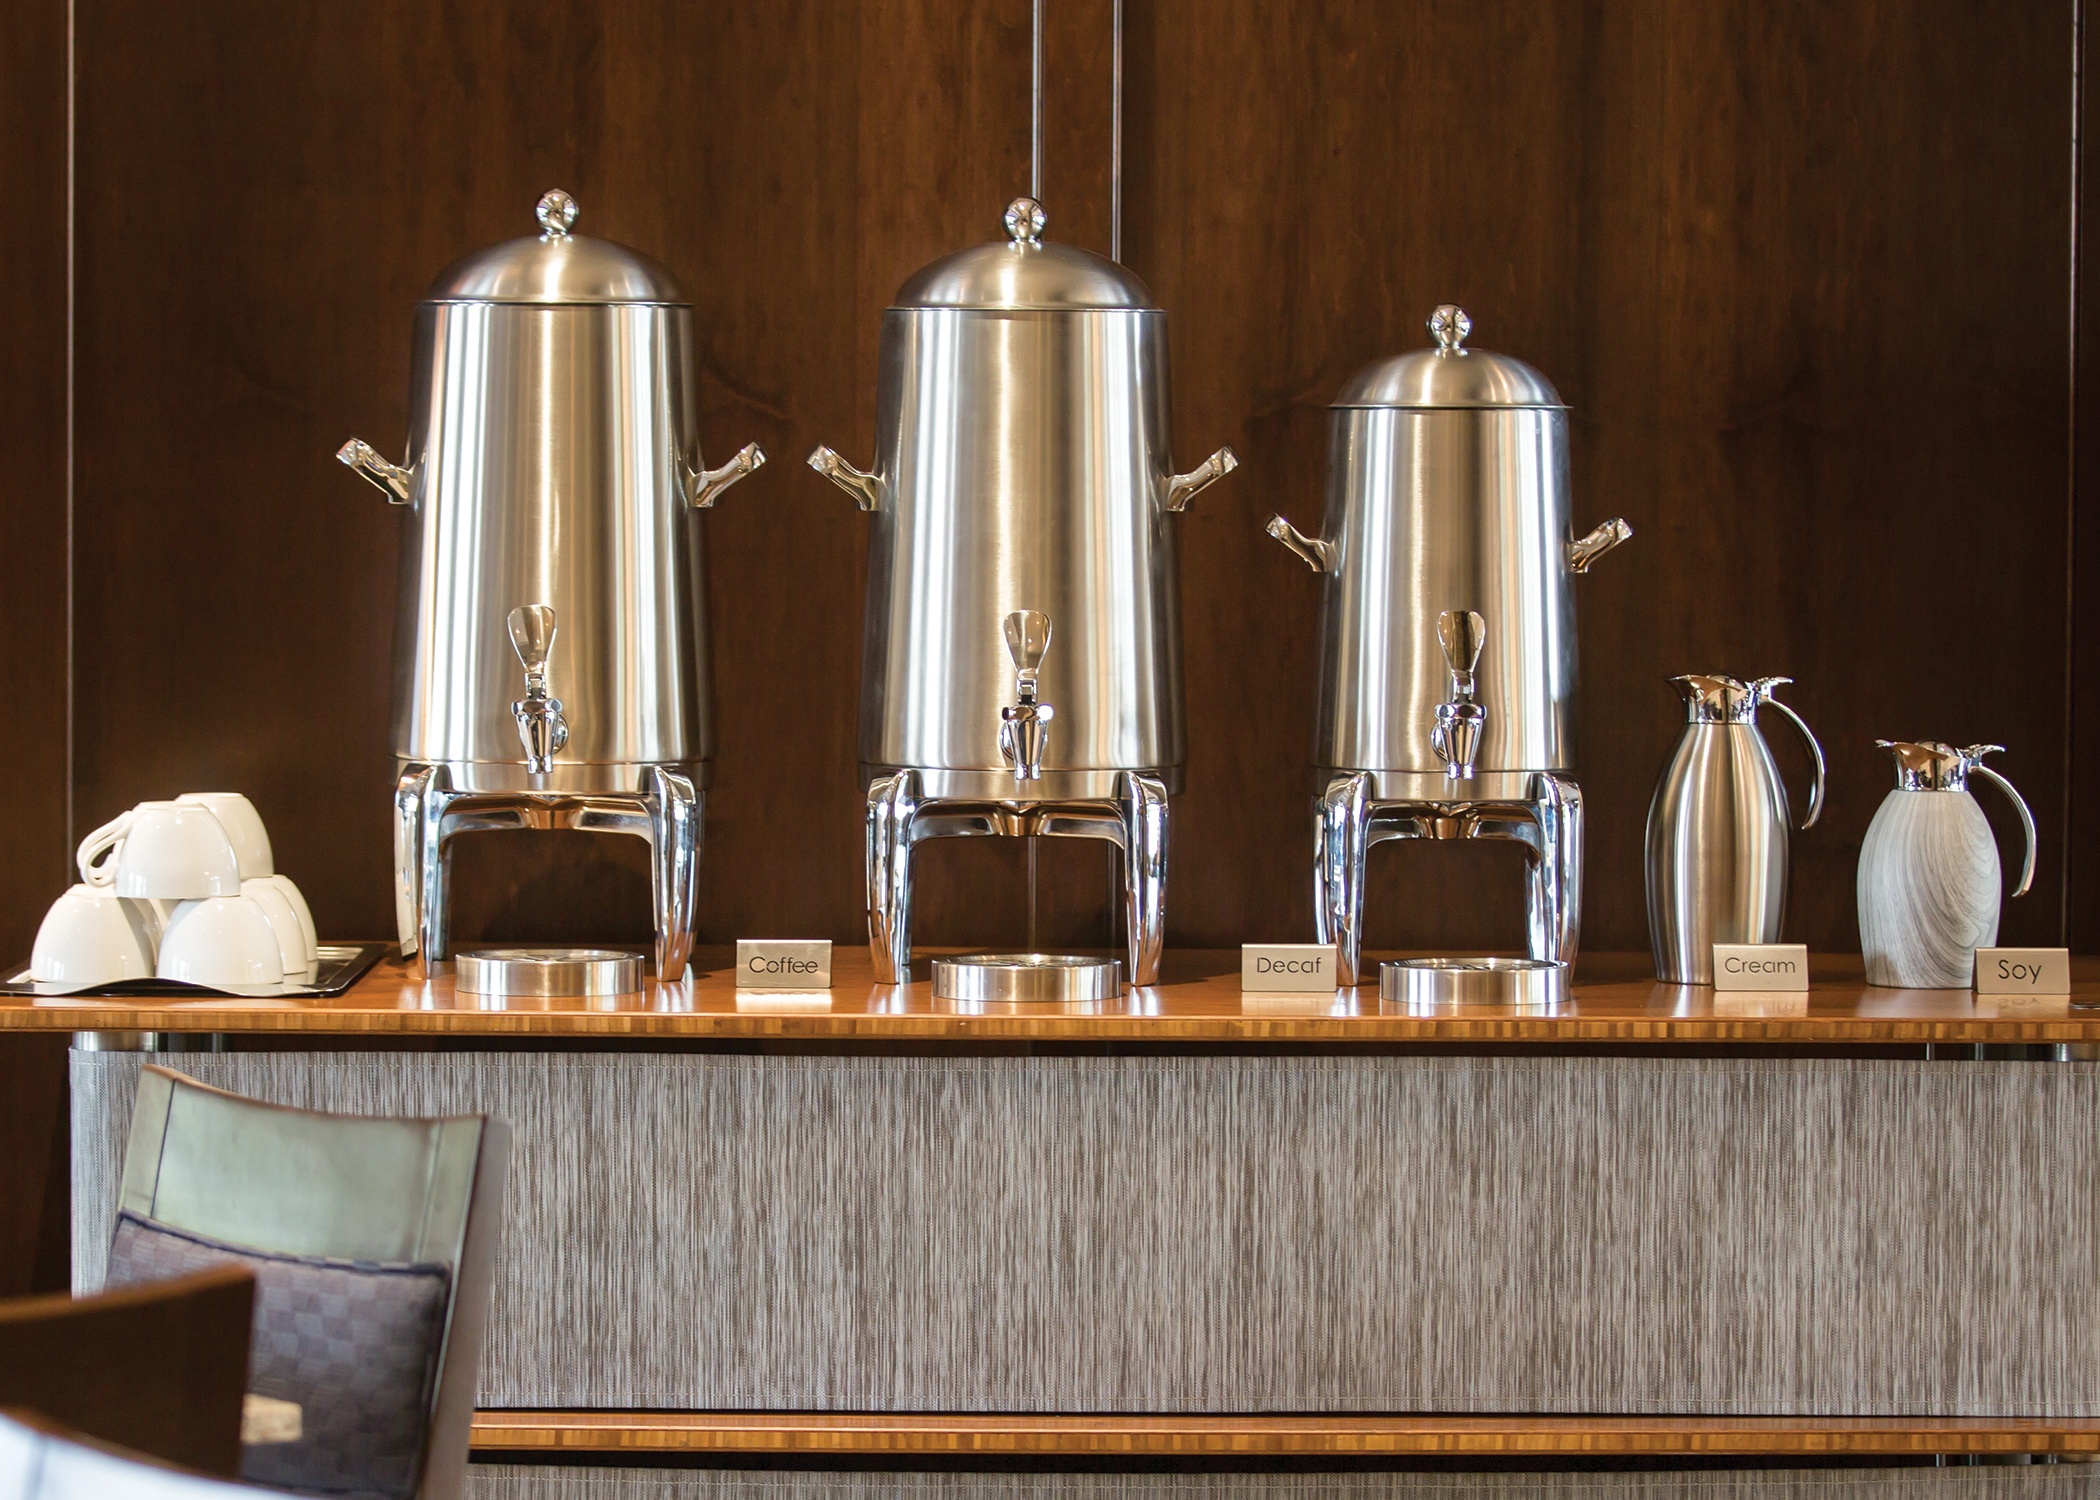 Case Study: How the Flame Free™ Thermo-Urns™ Improved Coffee Service for a  Las Vegas Casino